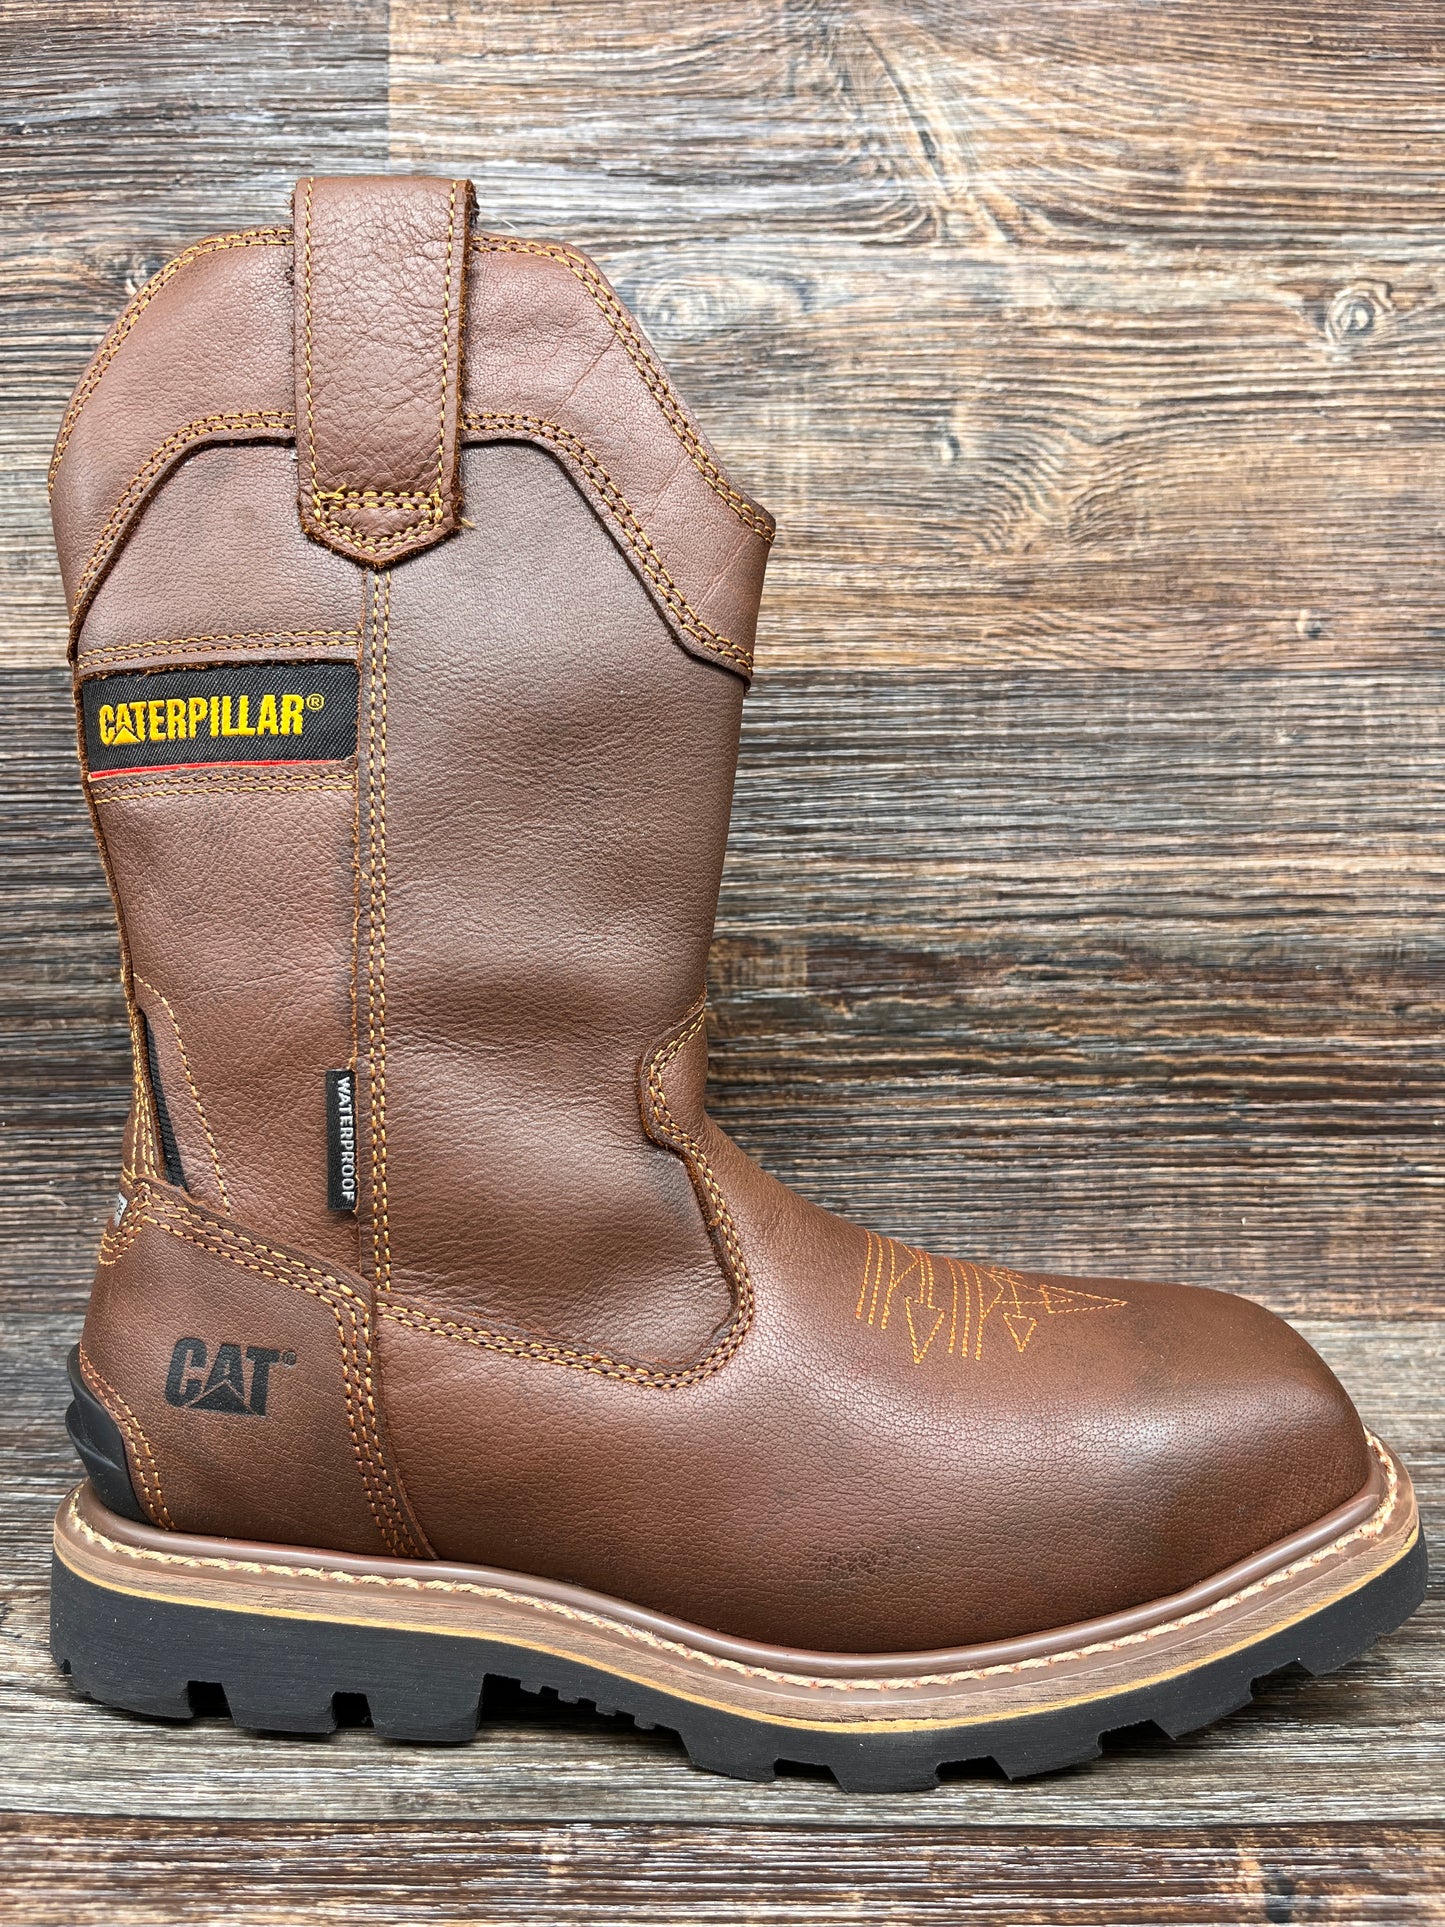 p91442 Men's Cylinder Composite Safety Toe Waterproof Work Boot by Caterpillar